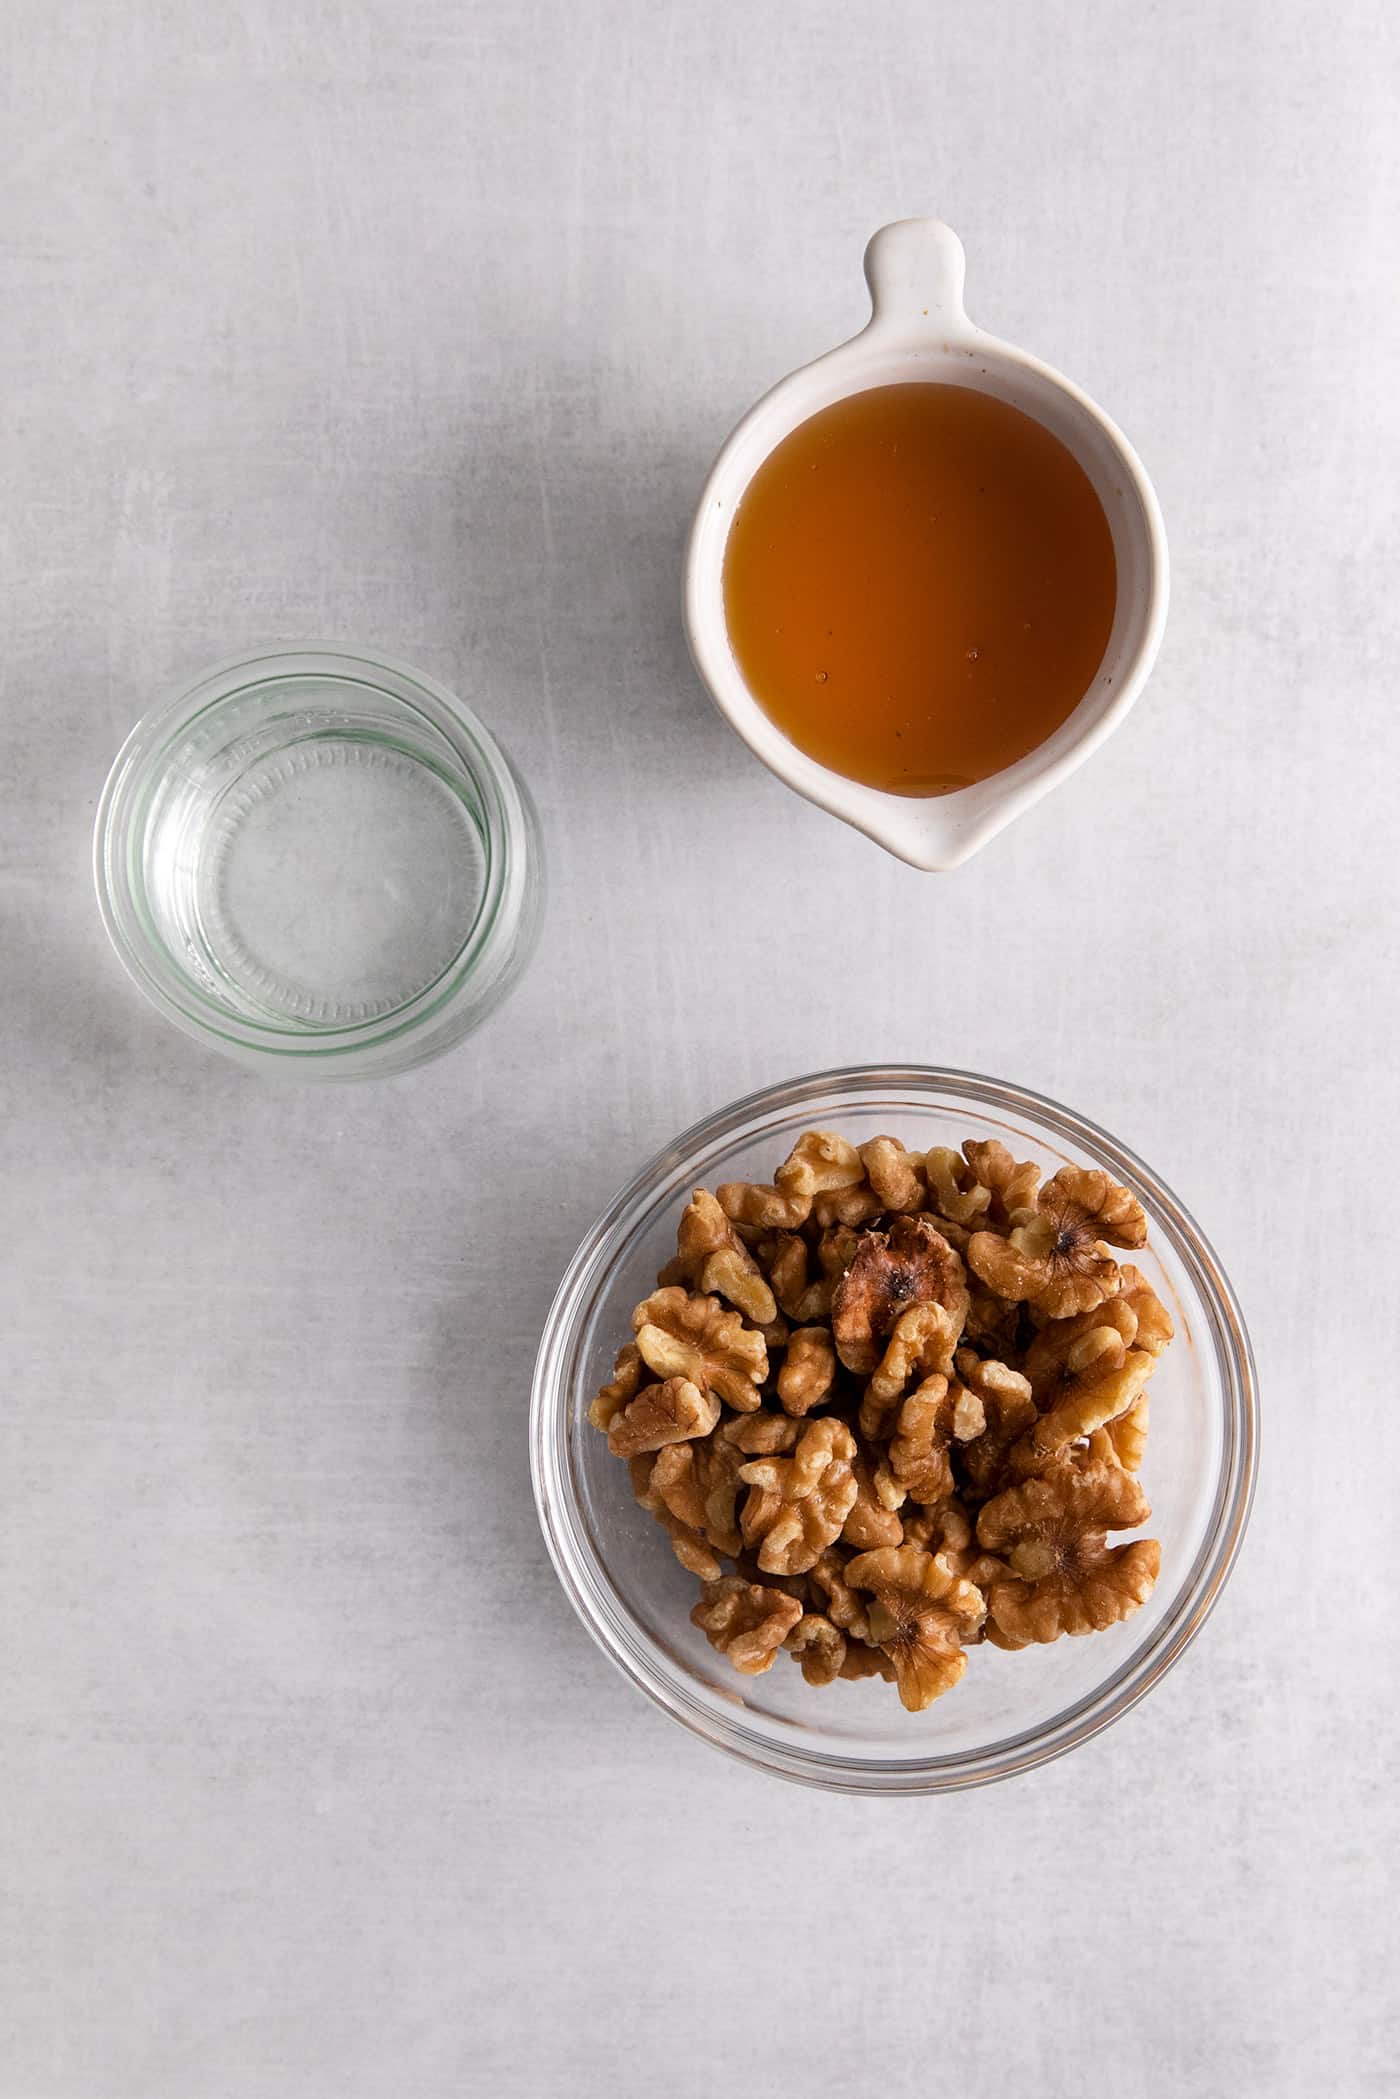 Ingredients to make honey coated walnuts